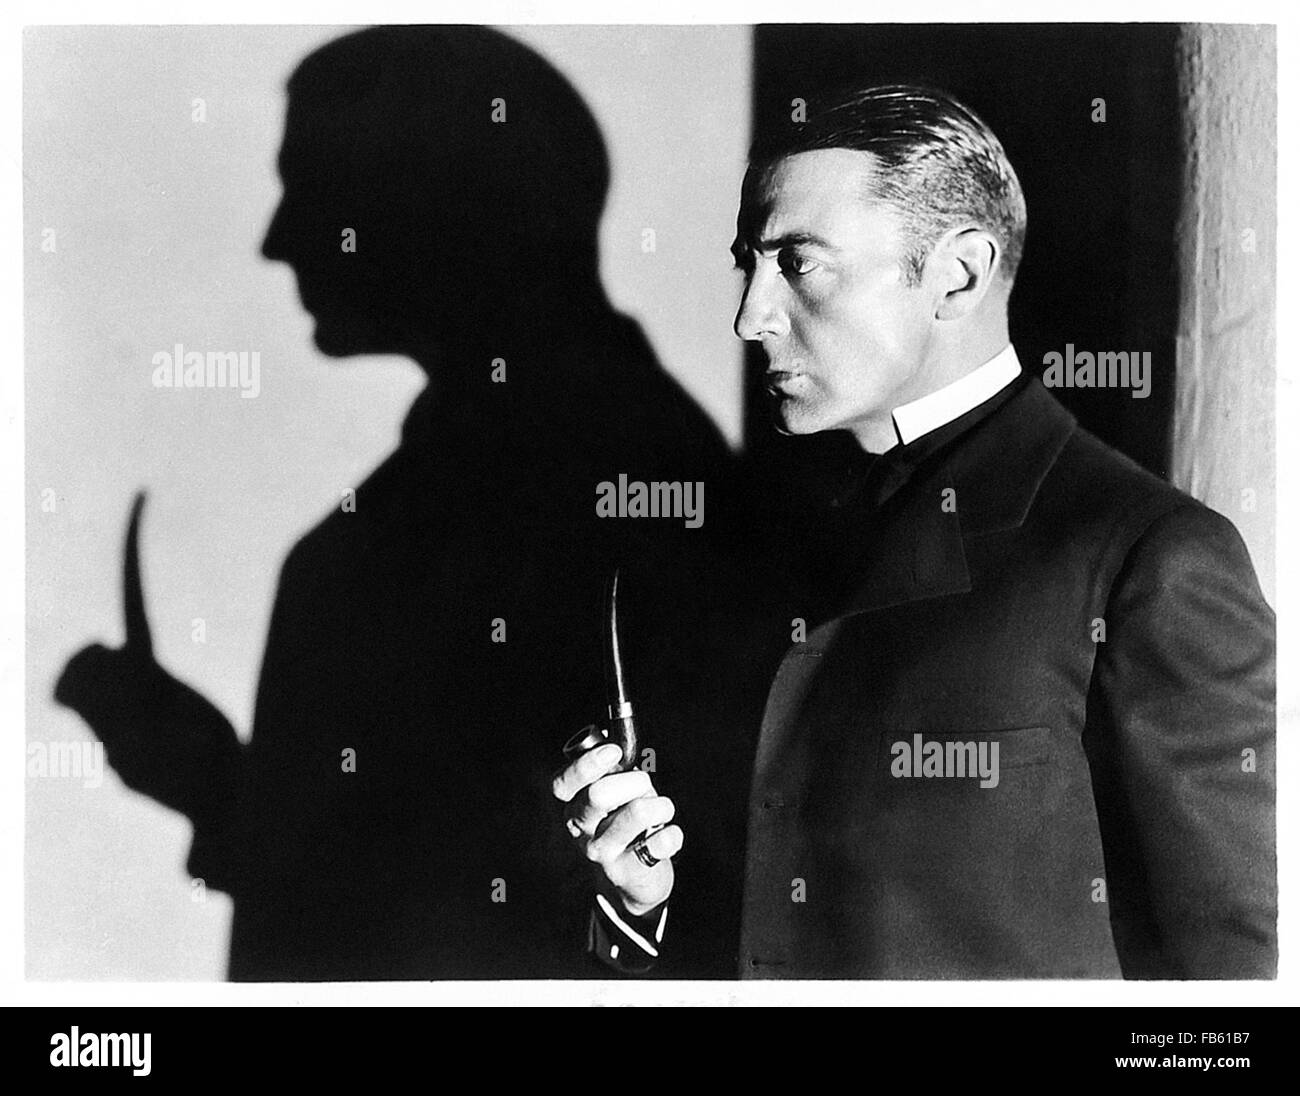 Publicity photograph showing Clive Brook in the role of Sherlock Holmes released to promote 'The Return of Sherlock Holmes' 1929 film directed by Basil Dean. See description for more information. Stock Photo